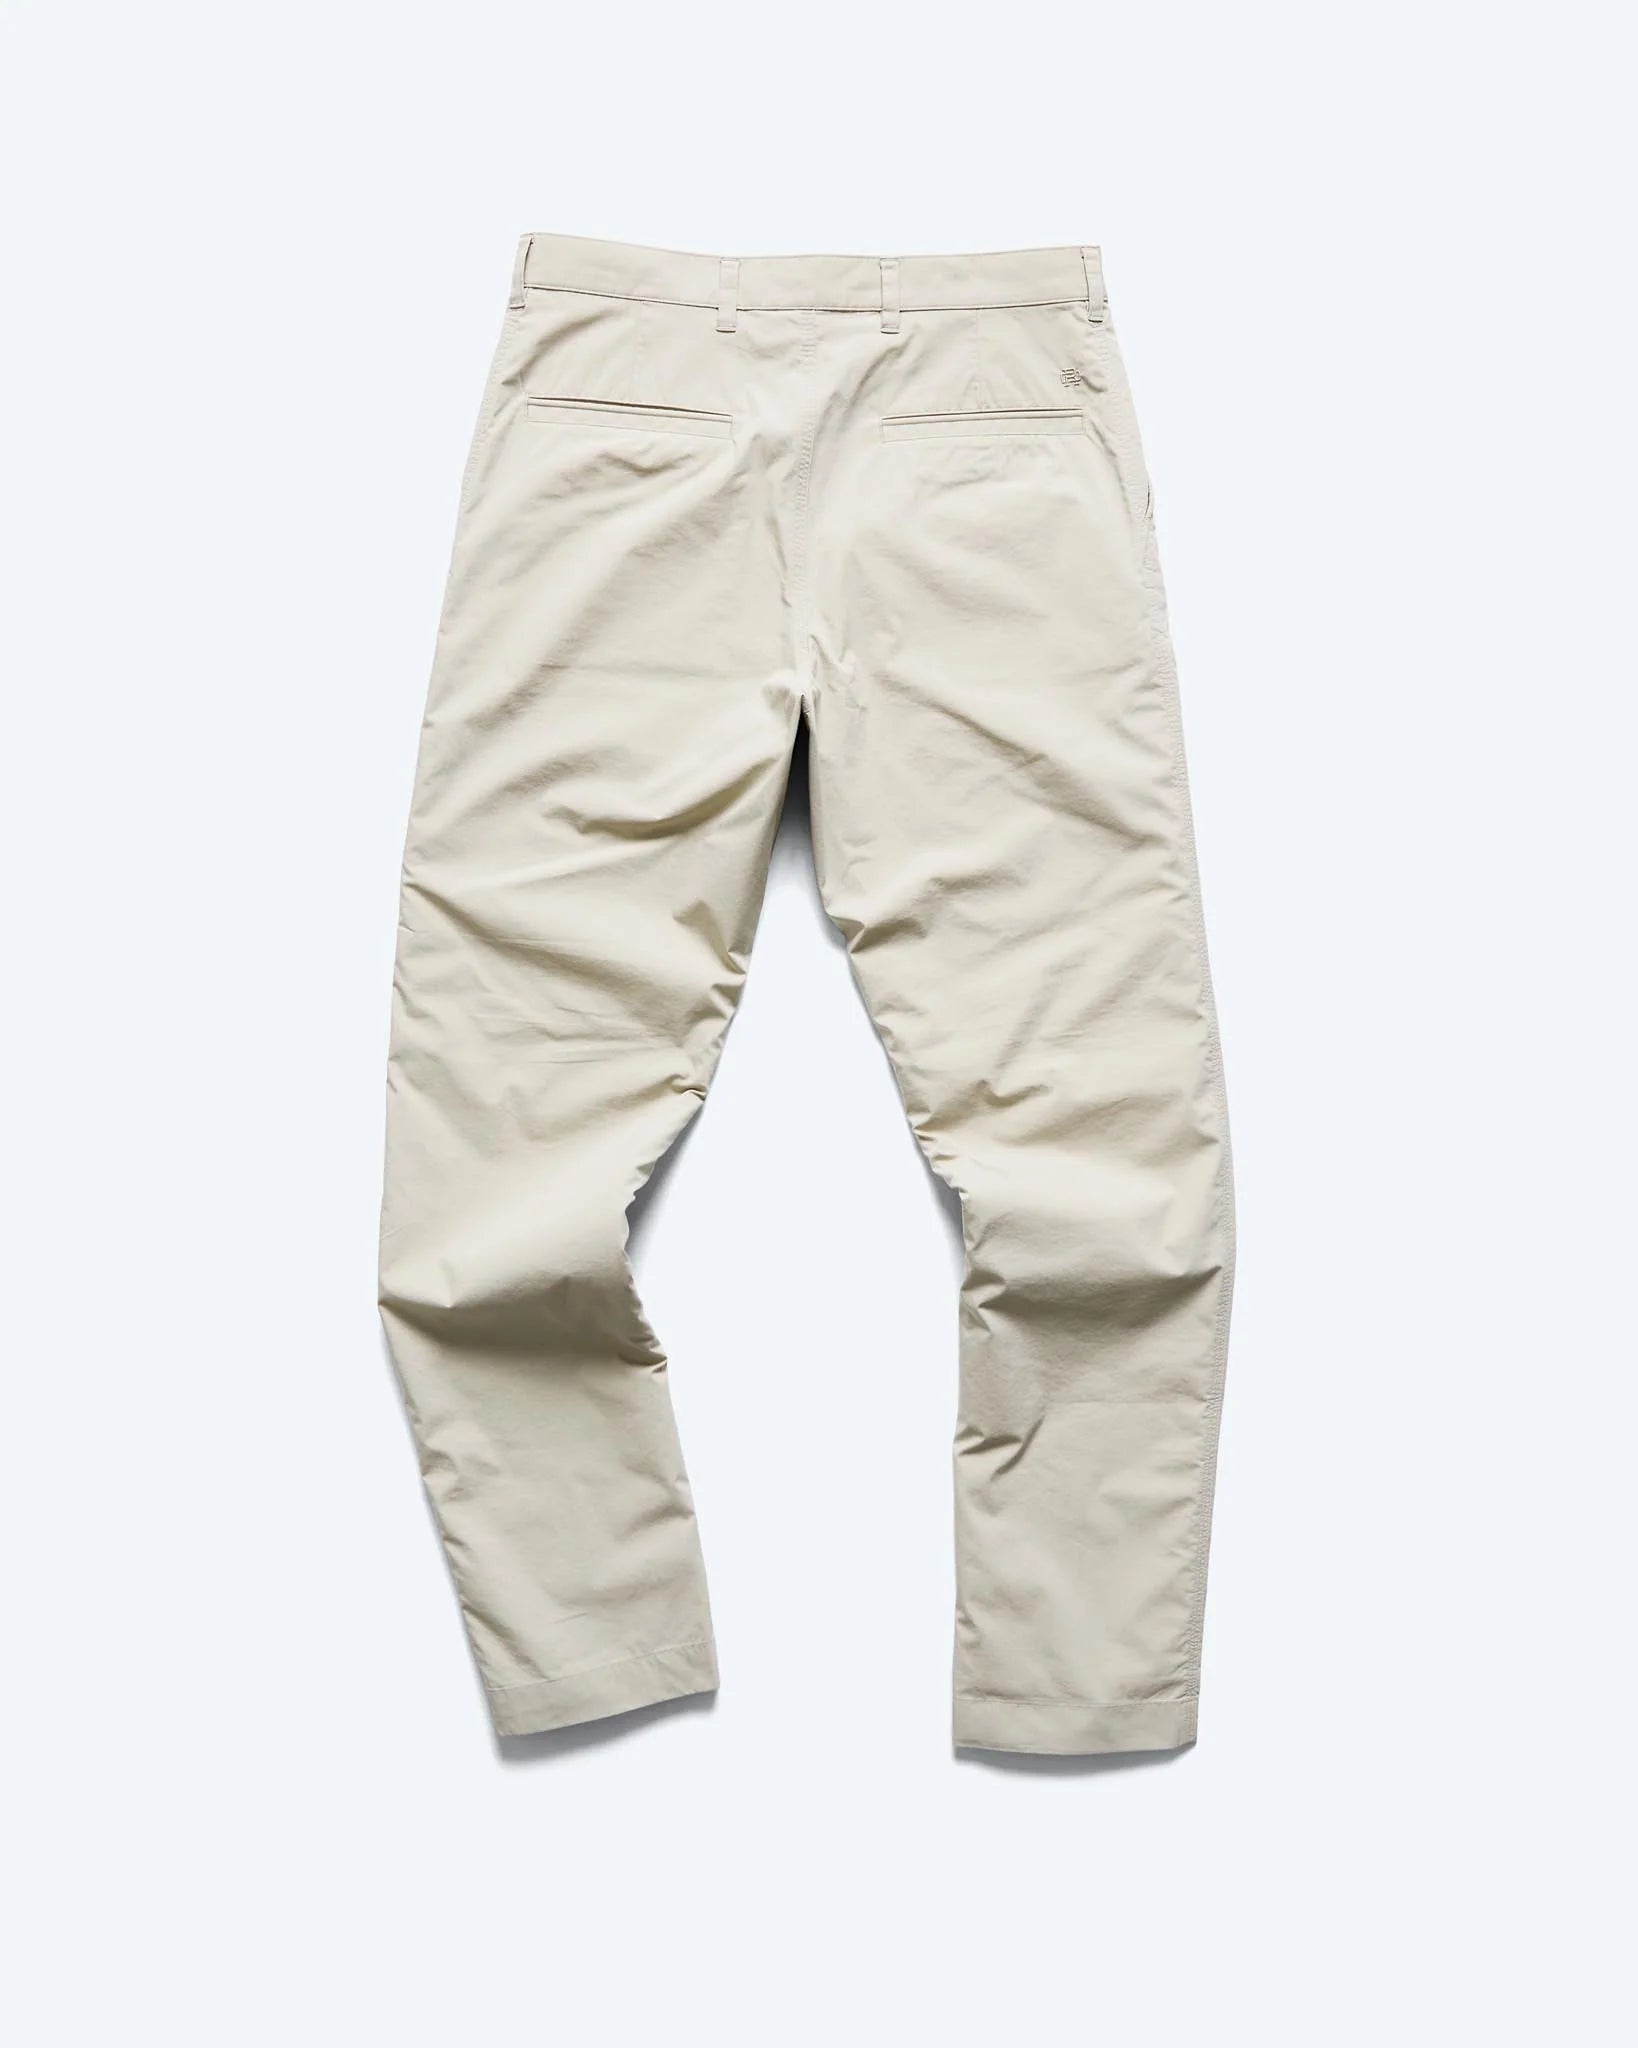 Reigning Champ Solotex Cotton Freshman Pant in Dove